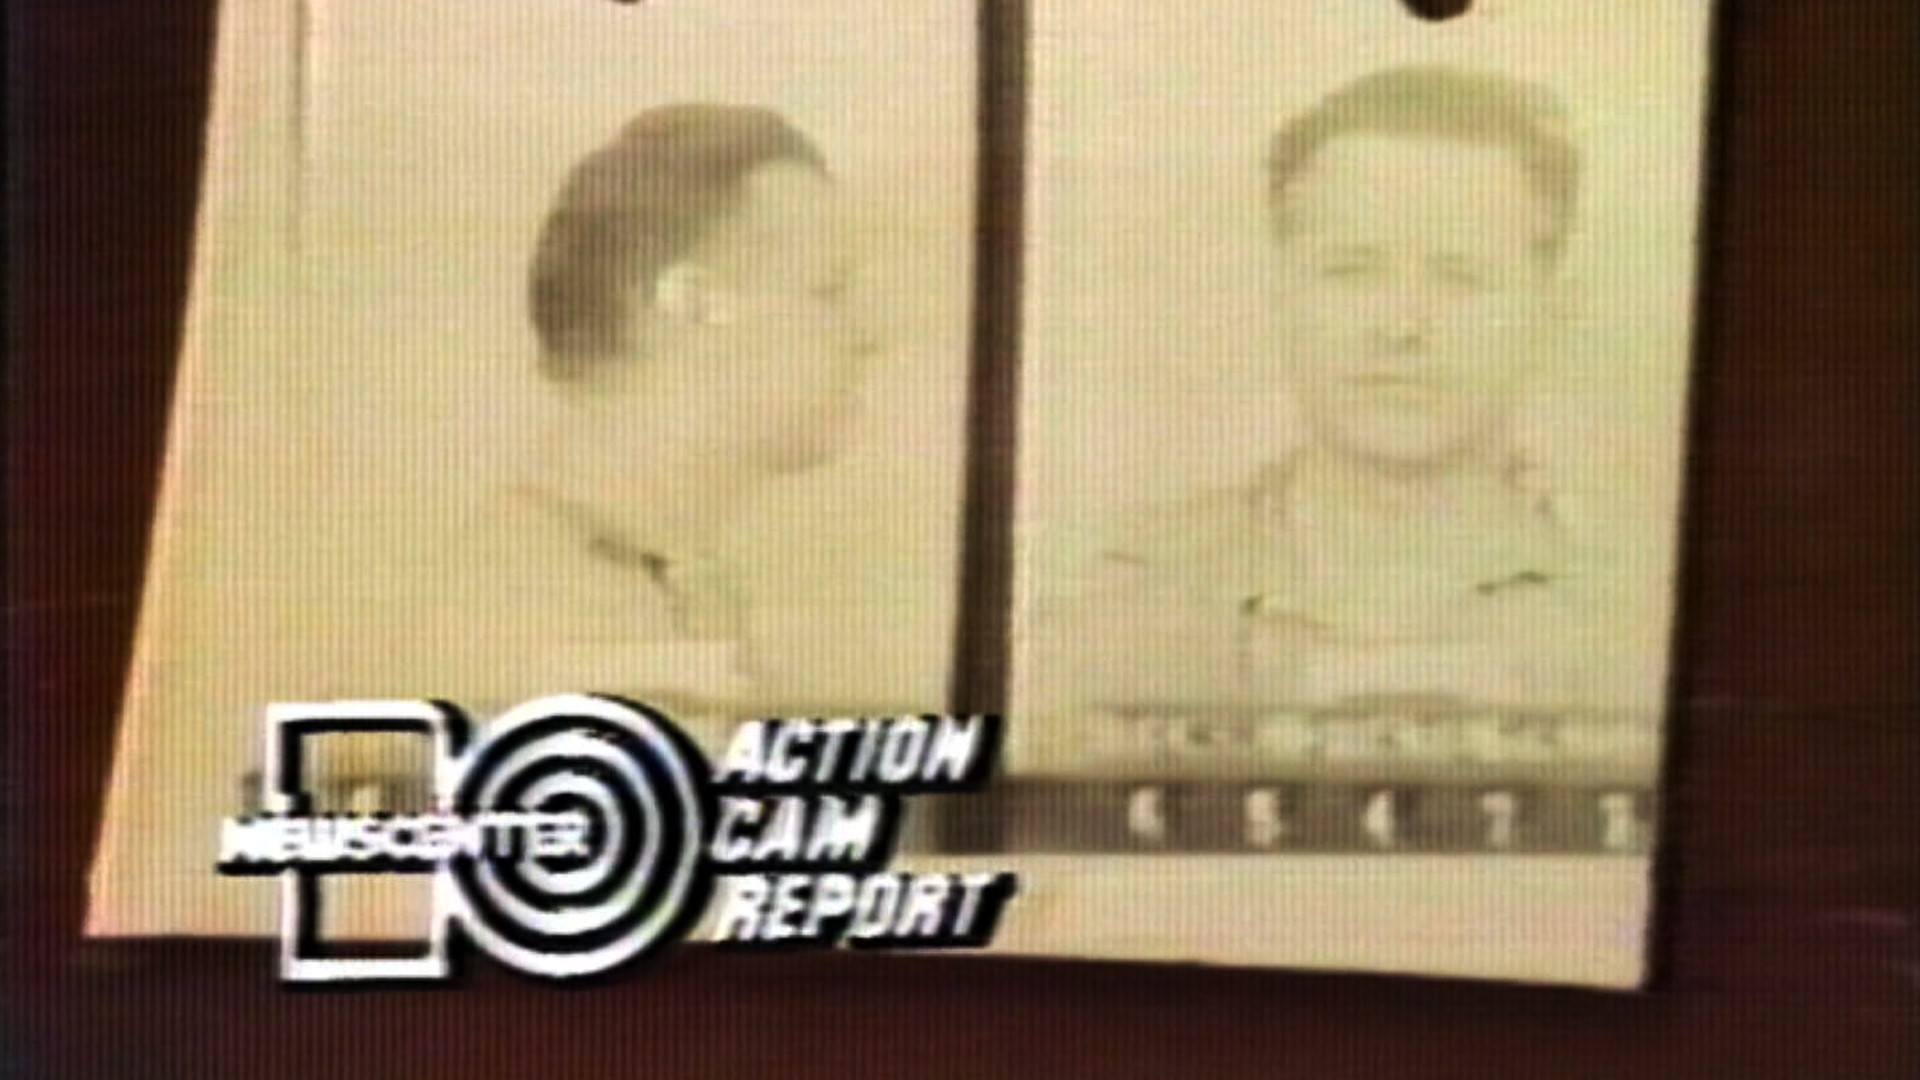 June 11, 1977: This video from the WBIR Vault is the full first block of the weekend newscast when James Earl Ray, the man who killed Dr. Martin Luther King, Jr., escaped from Brushy Mountain State Prison in Petros, Tennessee.